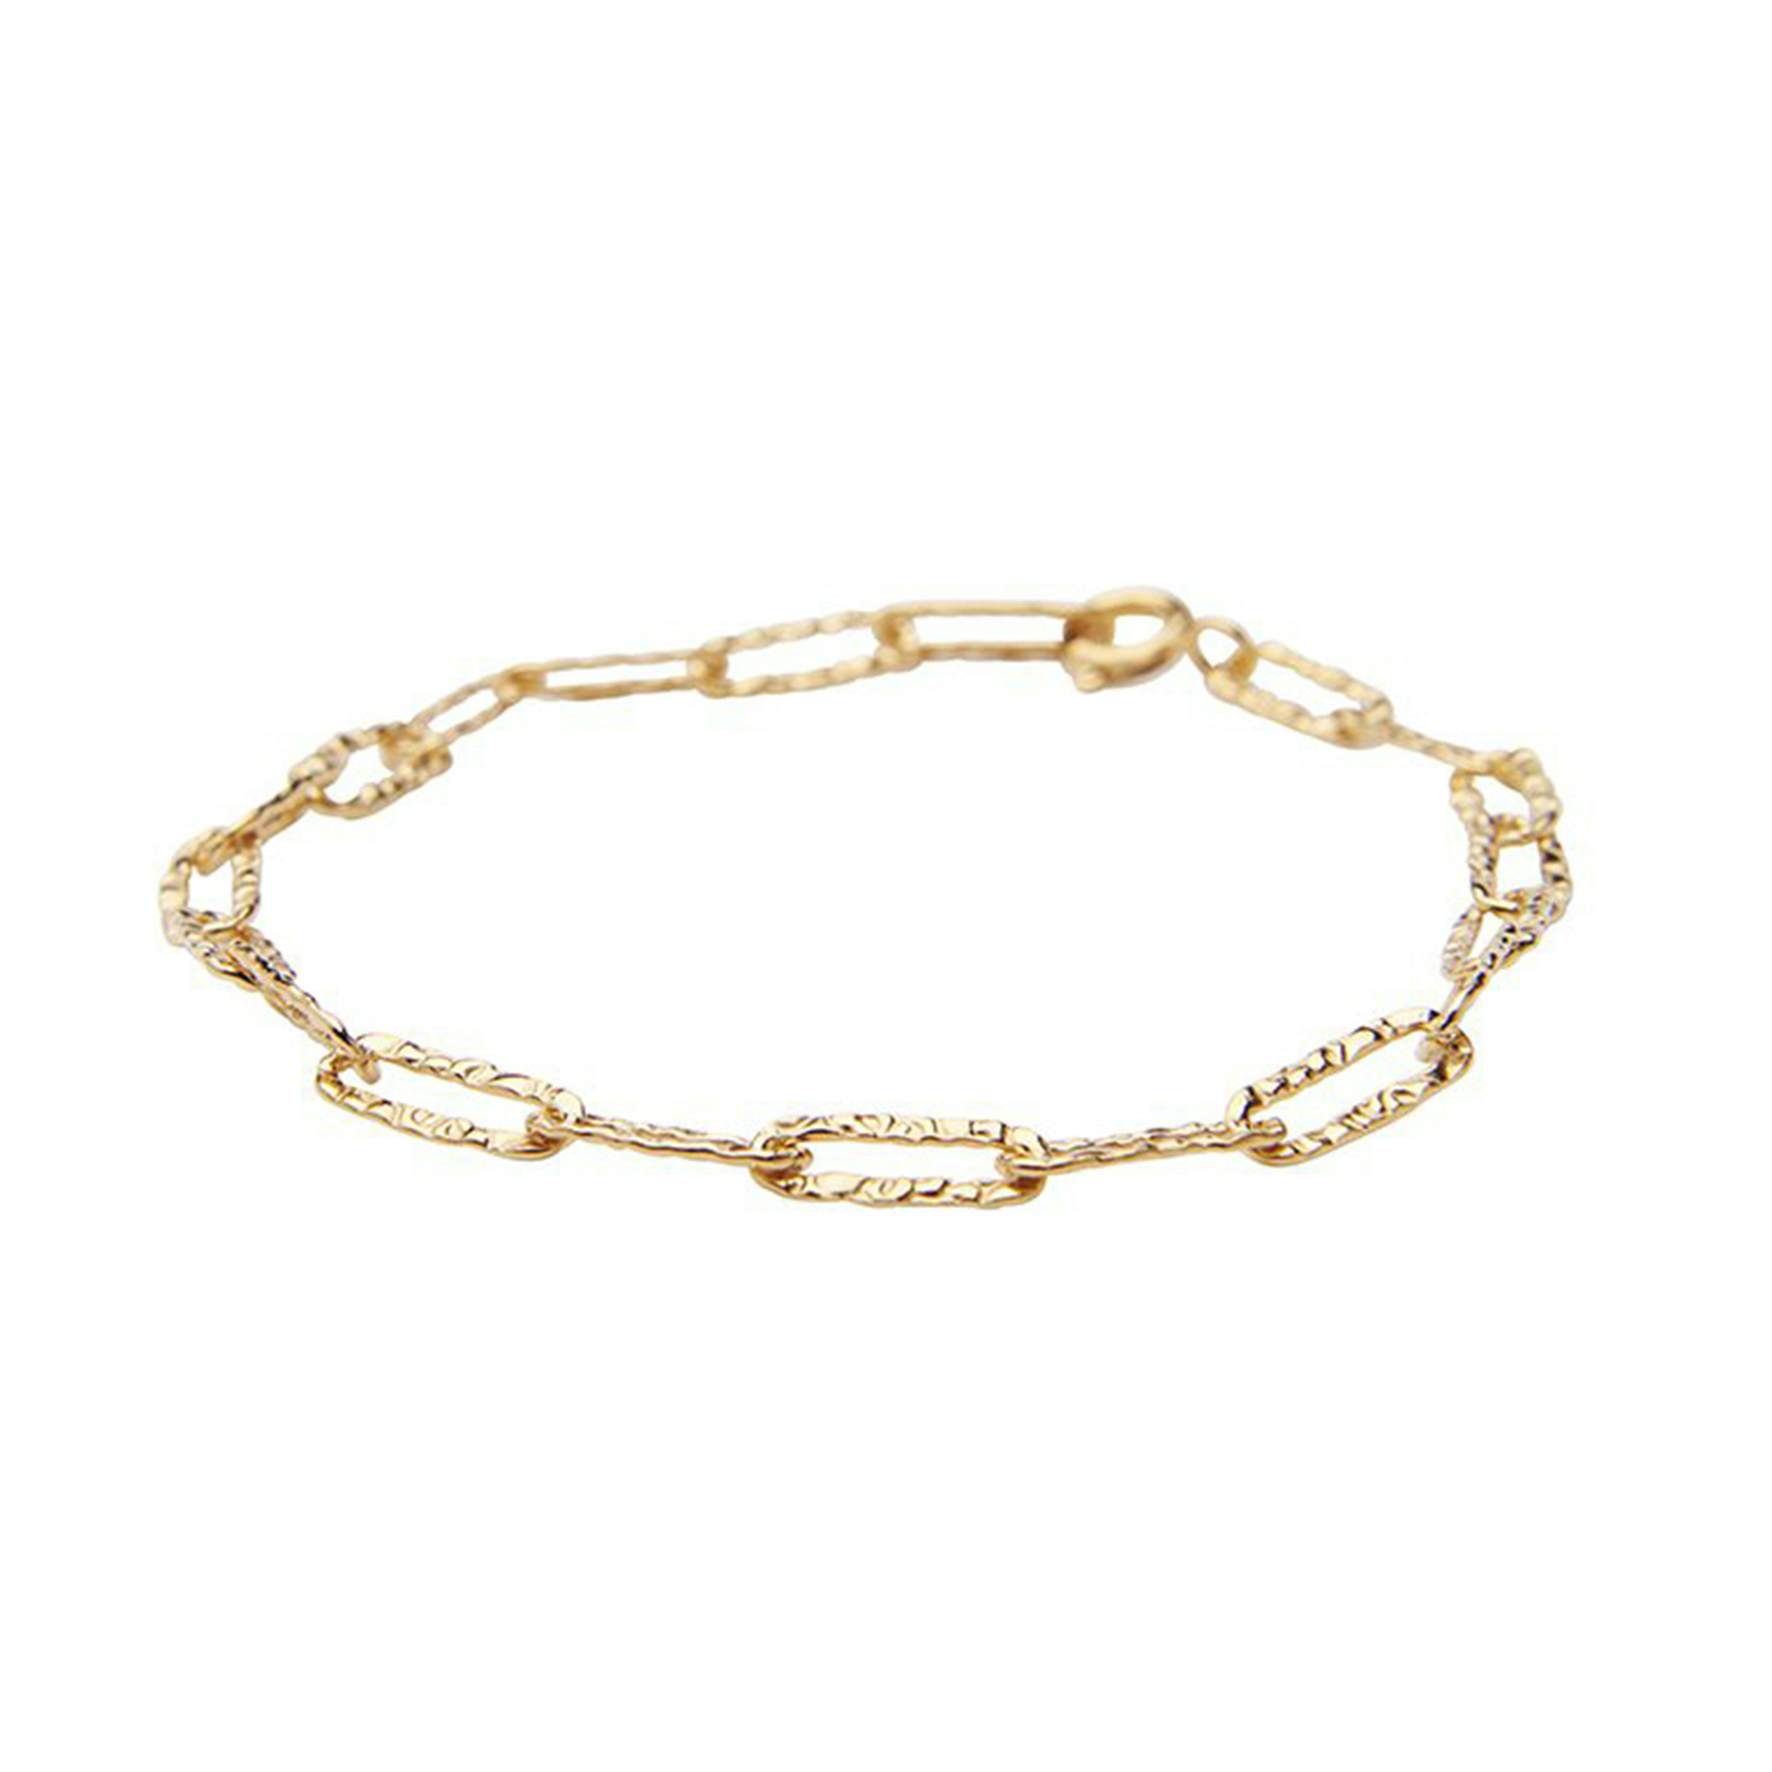 Ginny Bracelet from Pico in Goldplated-Silver Sterling 925